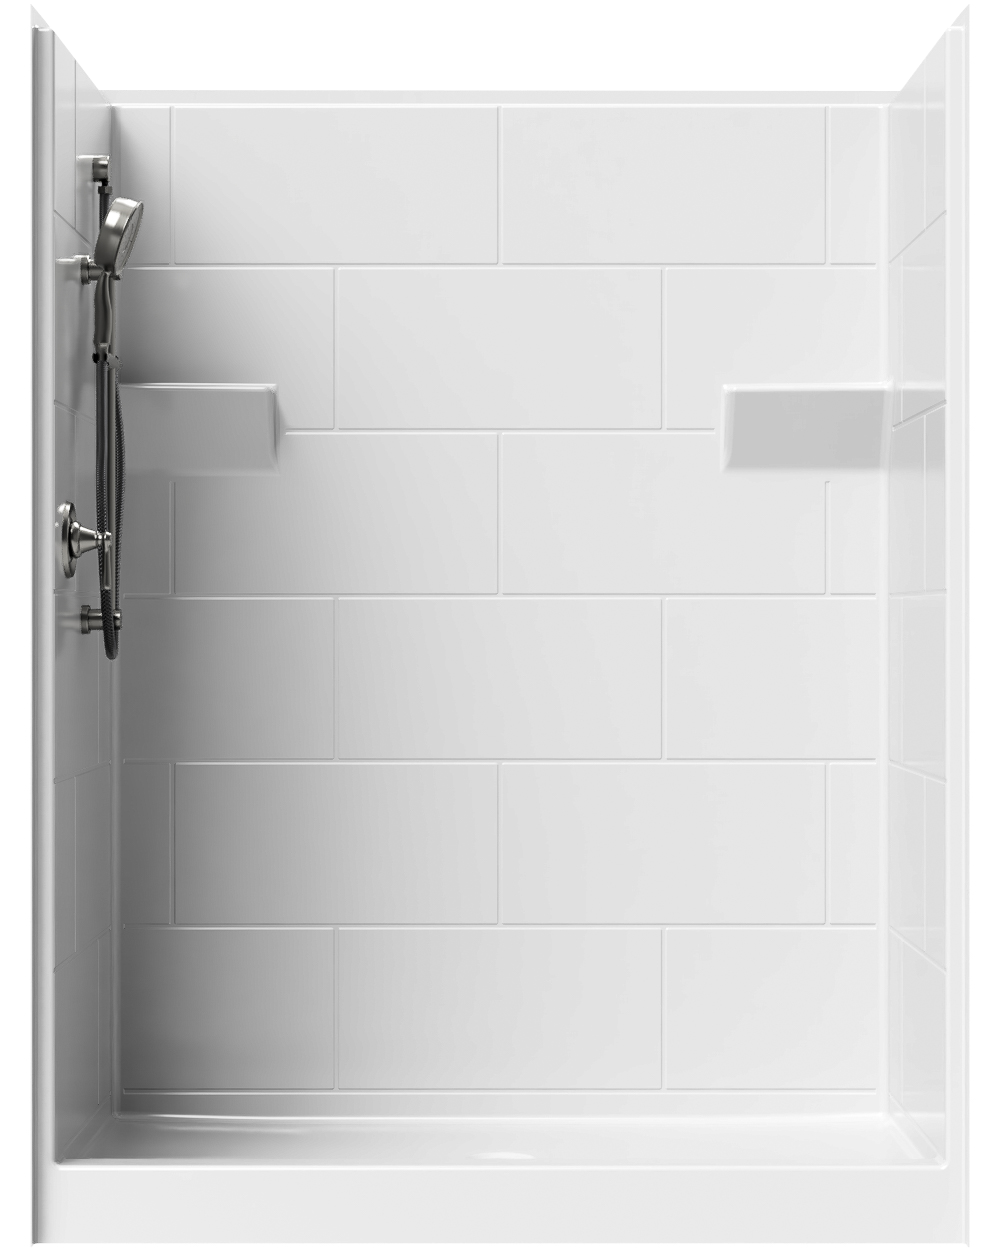 5' Curbed Shower with Simulated Tile